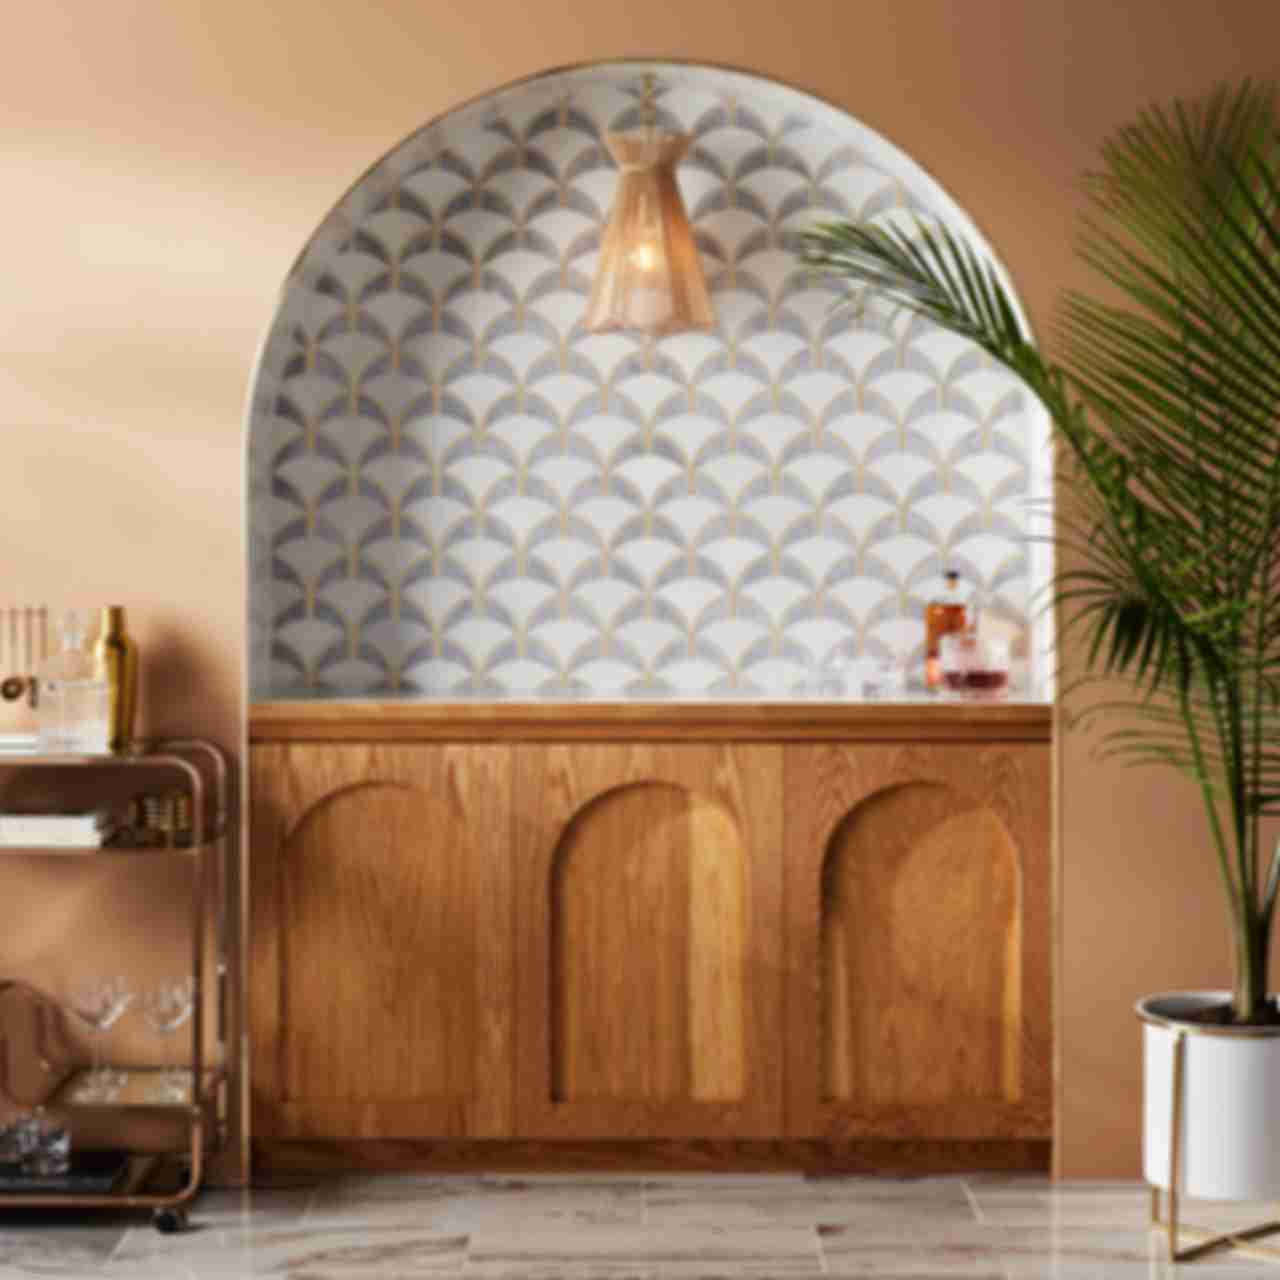 An elegant home bar backsplash features Art Deco-inspired waterjet marble mosaic tile in shades of white and grey marble, with gold accents.